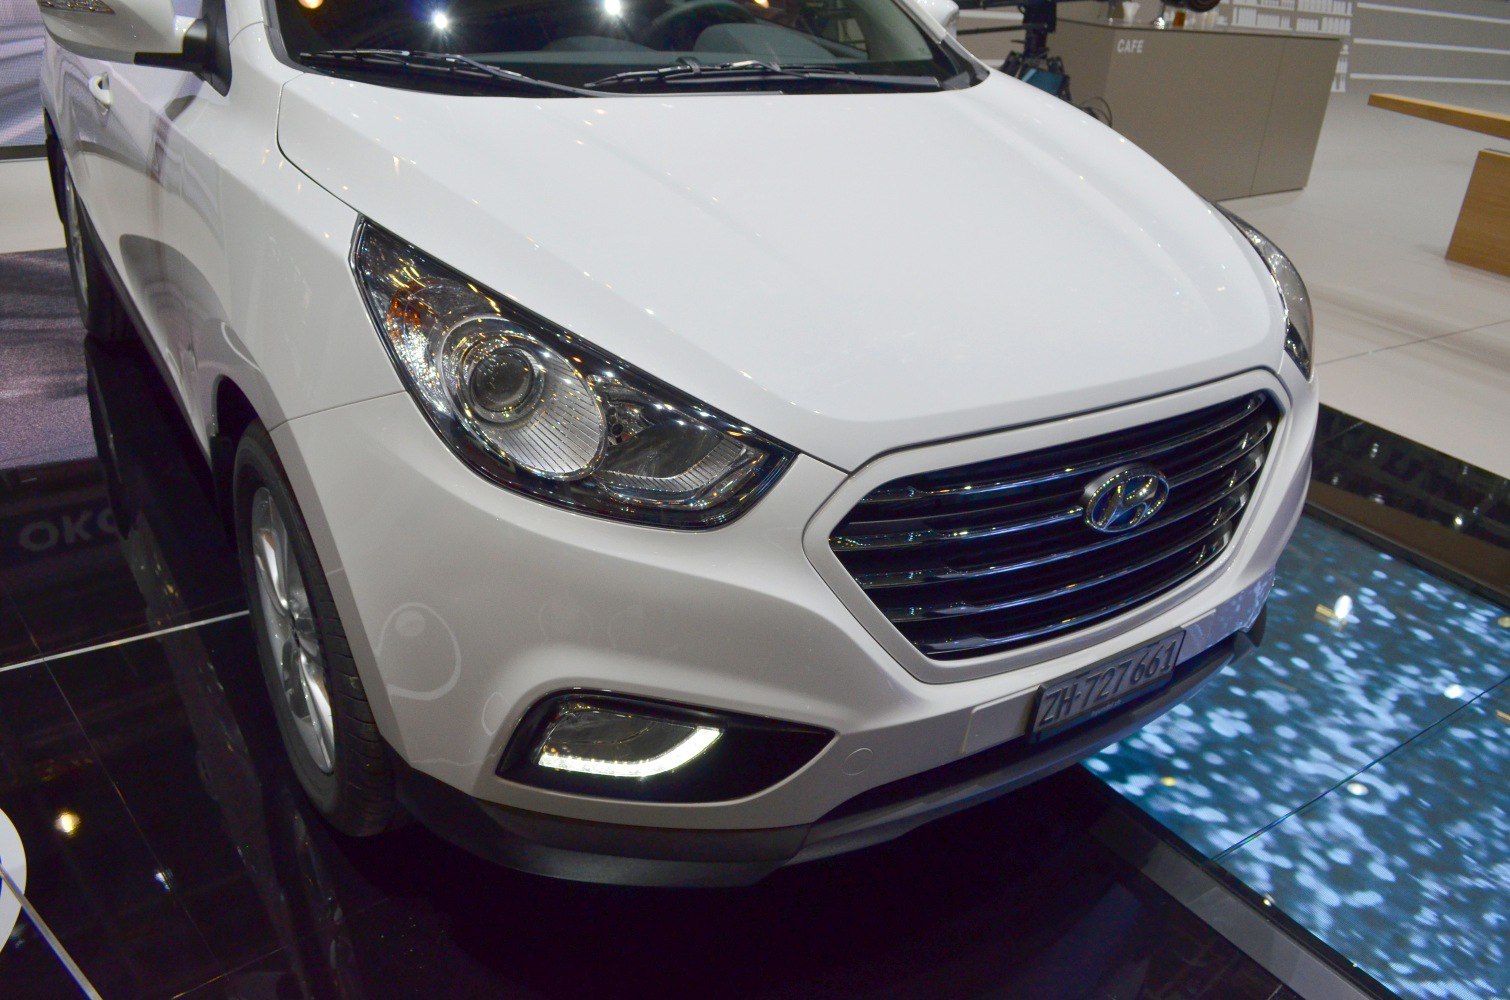 https://totalrenting.es/wp-content/uploads/2022/10/hyundai-ix35-fcev-2013-136-cv-fuel-cell-automatic-suv-5.png